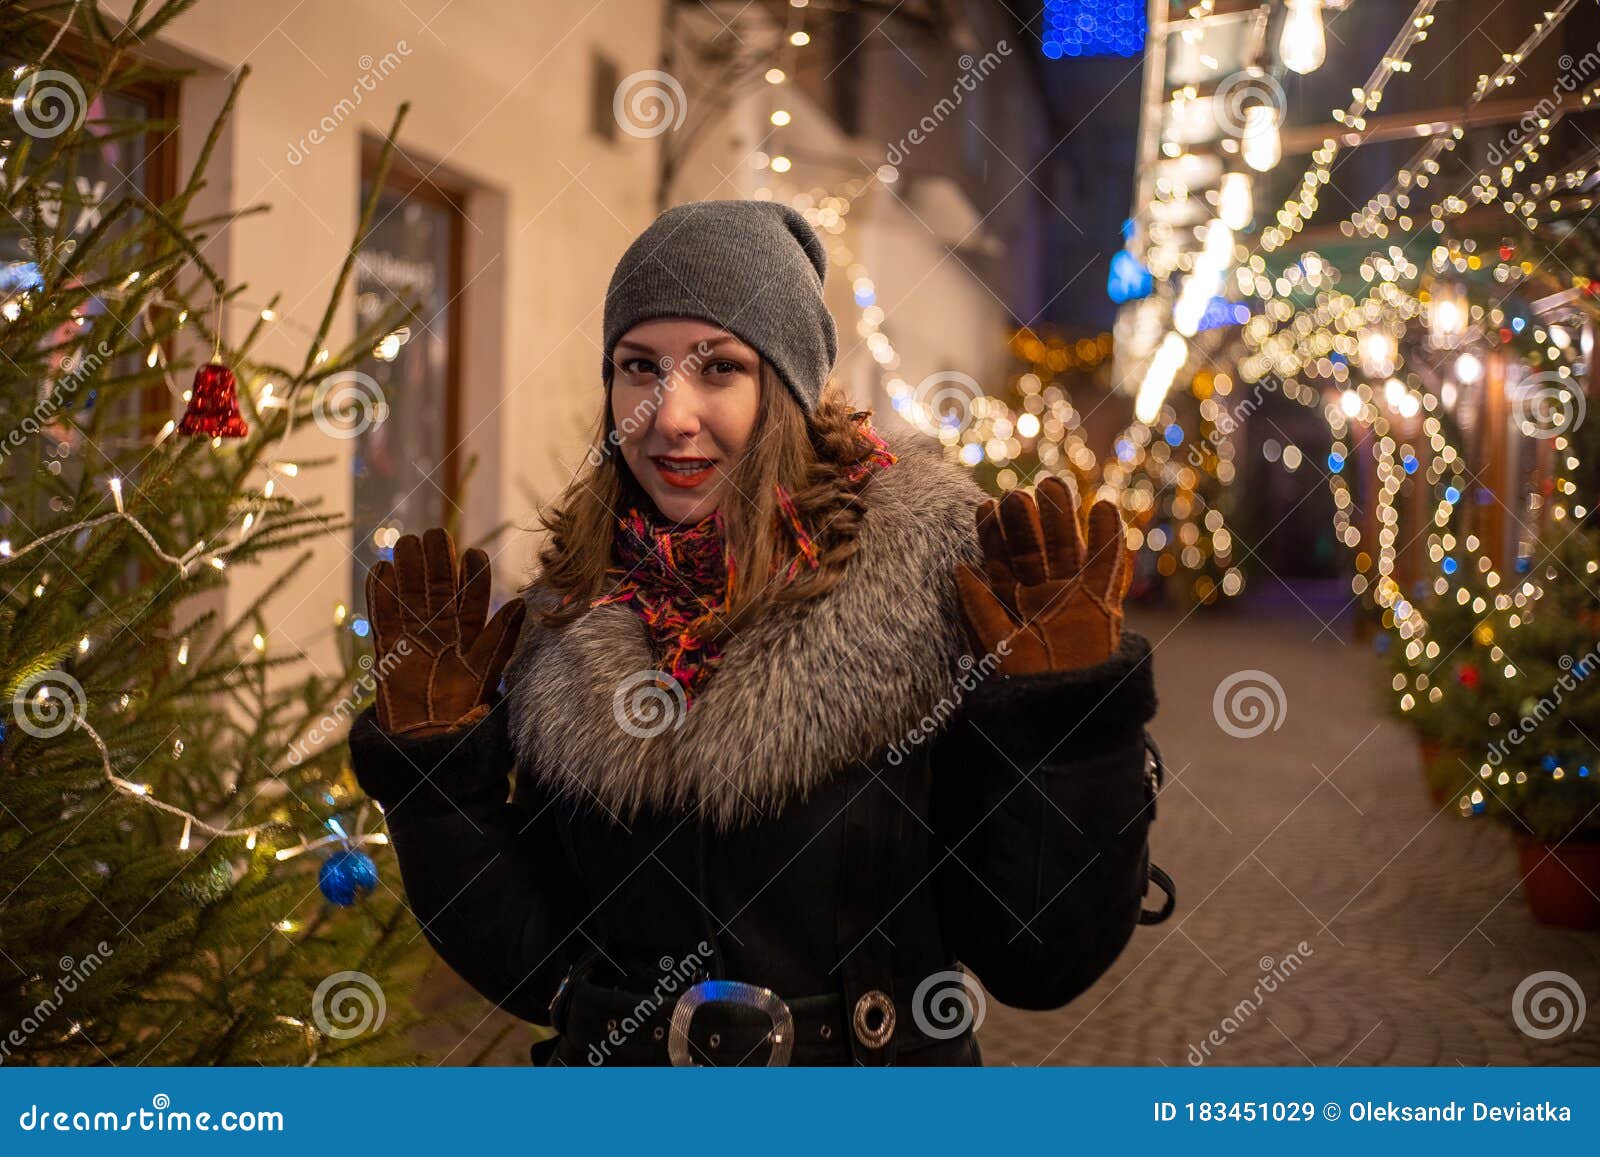 Young Beautiful Girl in New Year Decorations on the Street in Winter ...